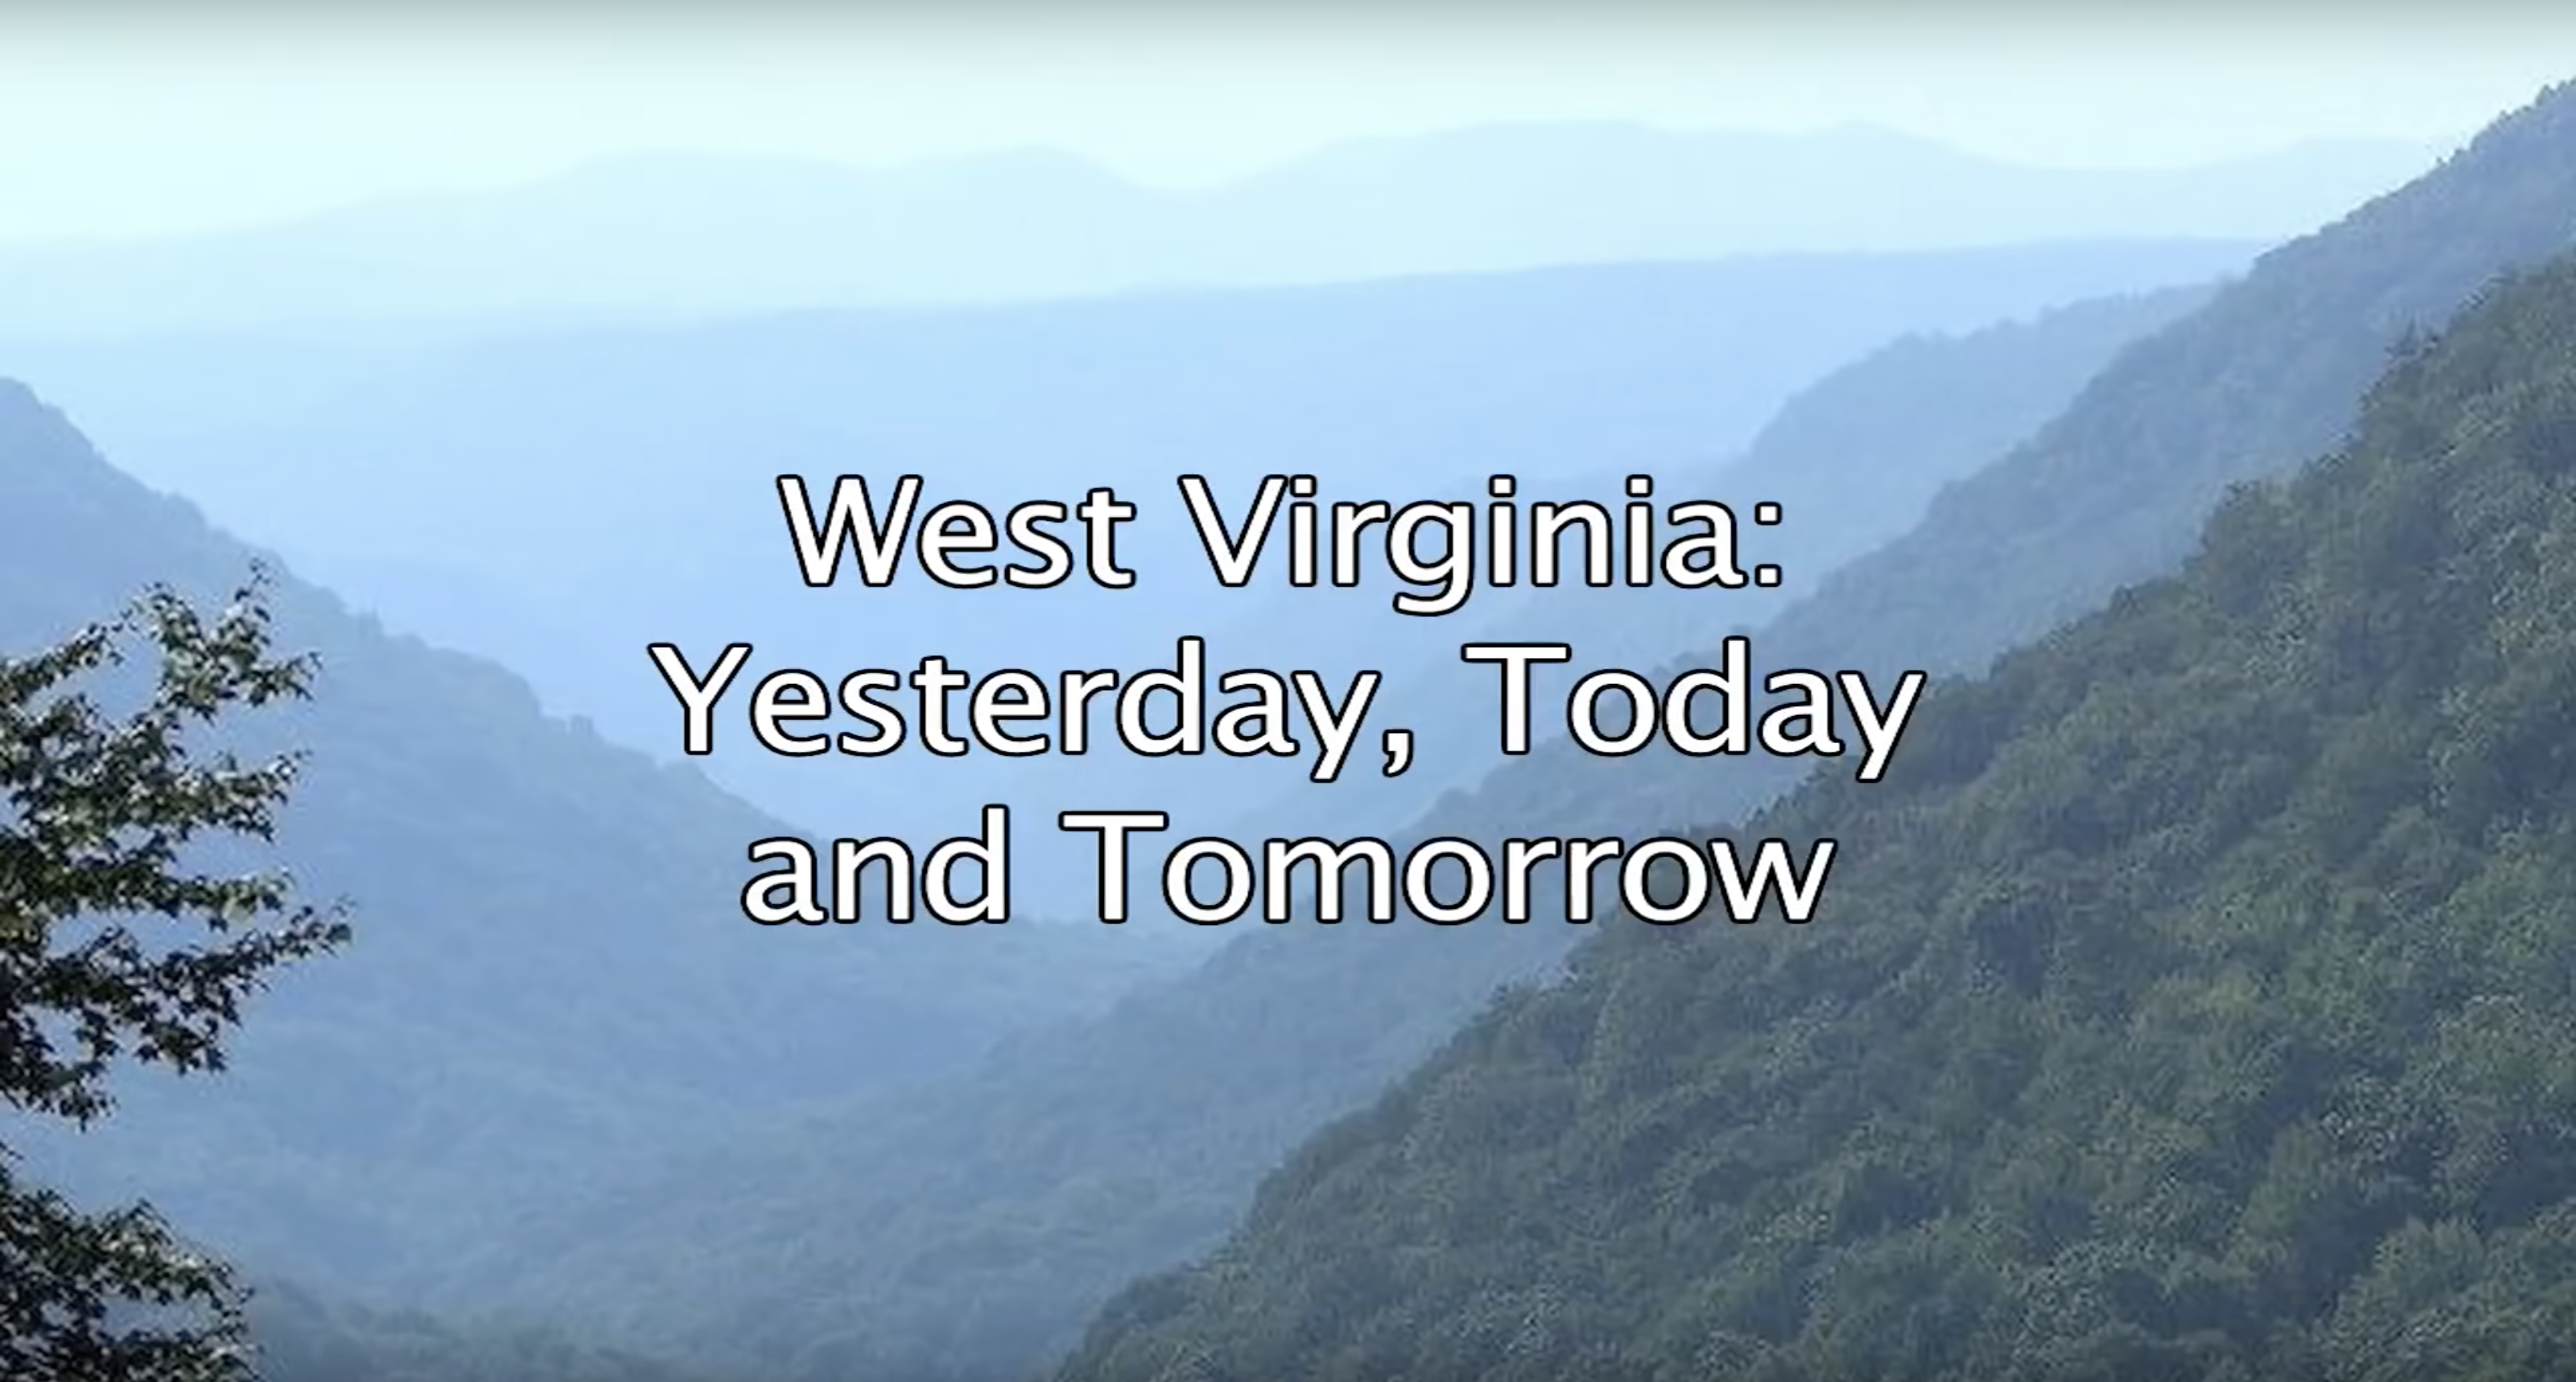 West Virginia: Yesterday, Today and Tomorrow